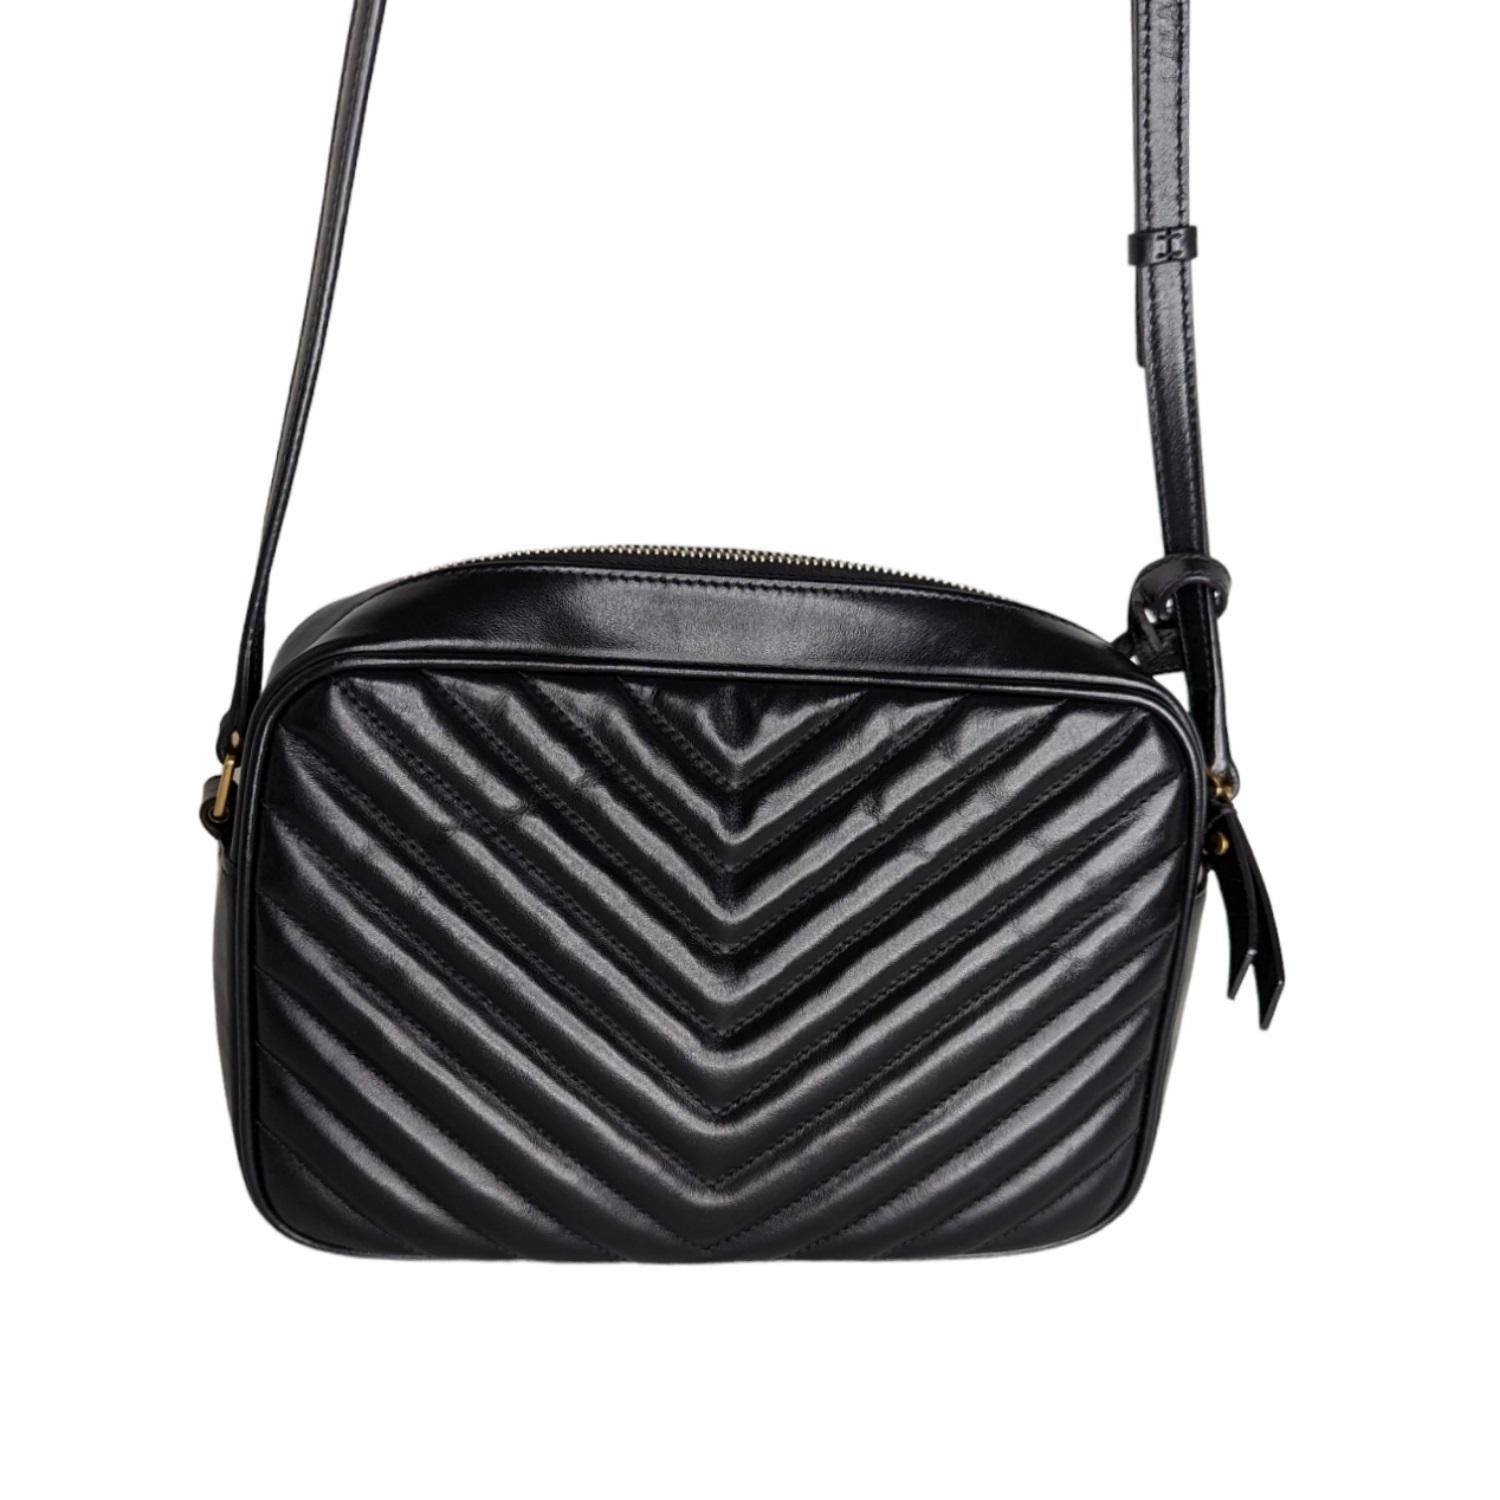 Inspired by vintage camera bags, this chic crossbody features elegant matelassé stitching, tonal logo-monogram hardware and a dramatic tassel at one side. Made in Italy.

French designer Yves Saint Laurent revolutionized the '60s and '70s with his